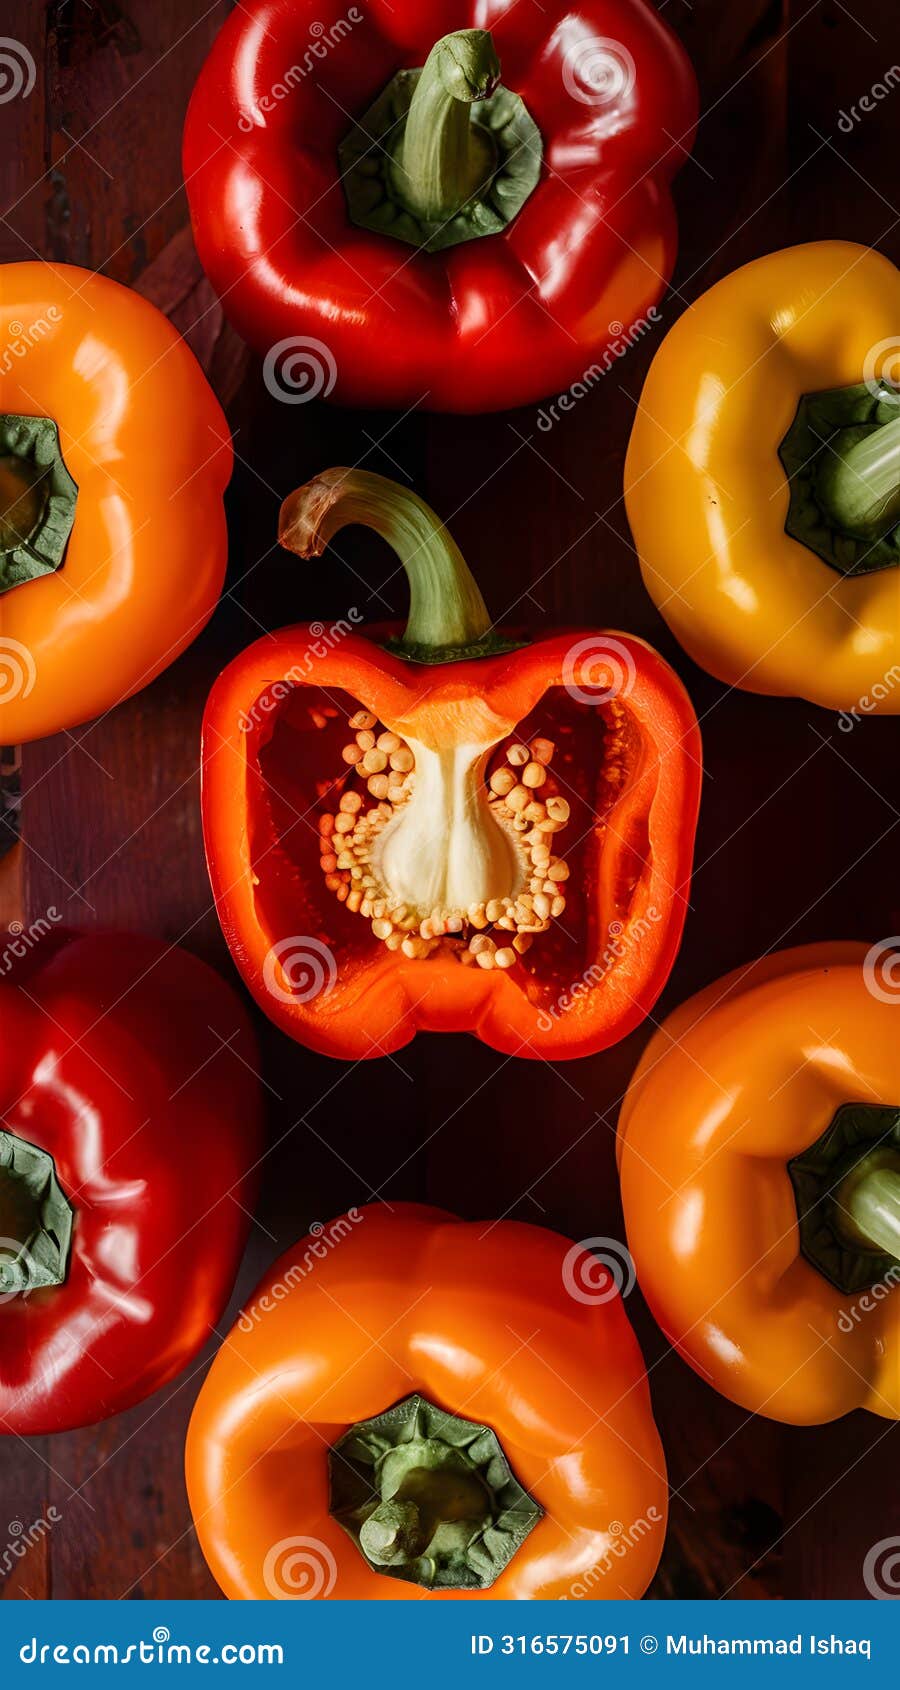 image an artistic portrayal of paprika bell peppers in photography